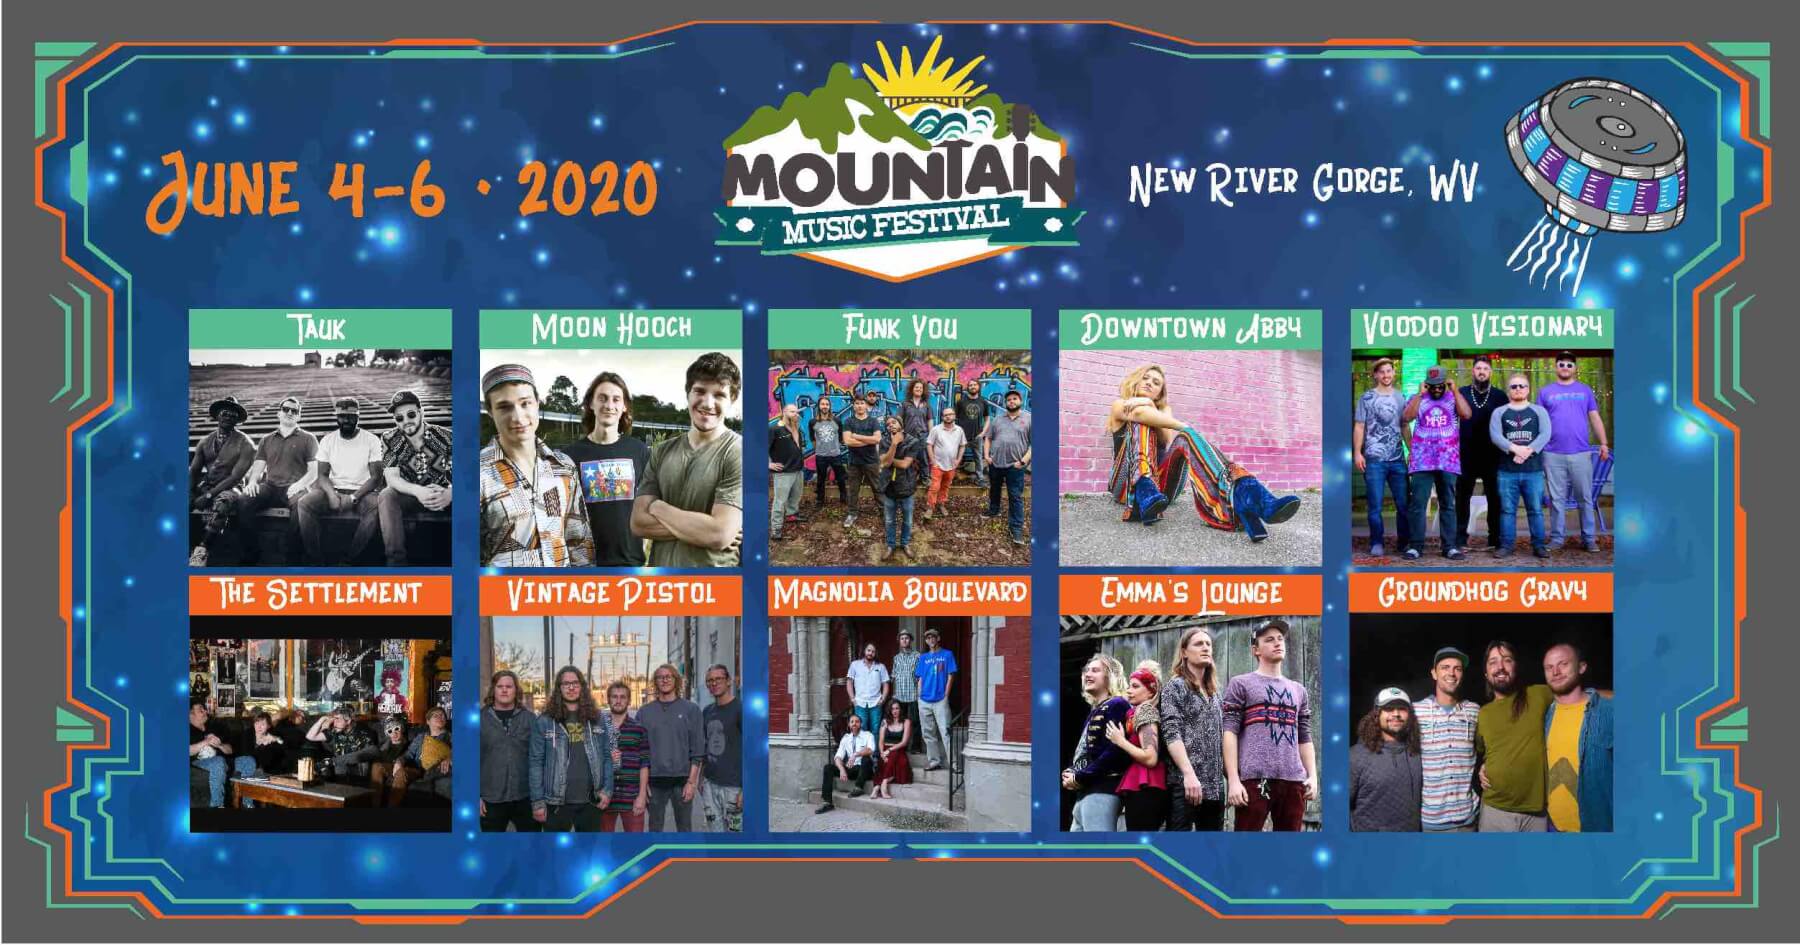 mountain music festival 2020 lineup announcement with Tauk moon hooch funk you downtown abby voodoo visionary the settlement vintage pistol magnolia boulevard emmas lounge groundhog gravy